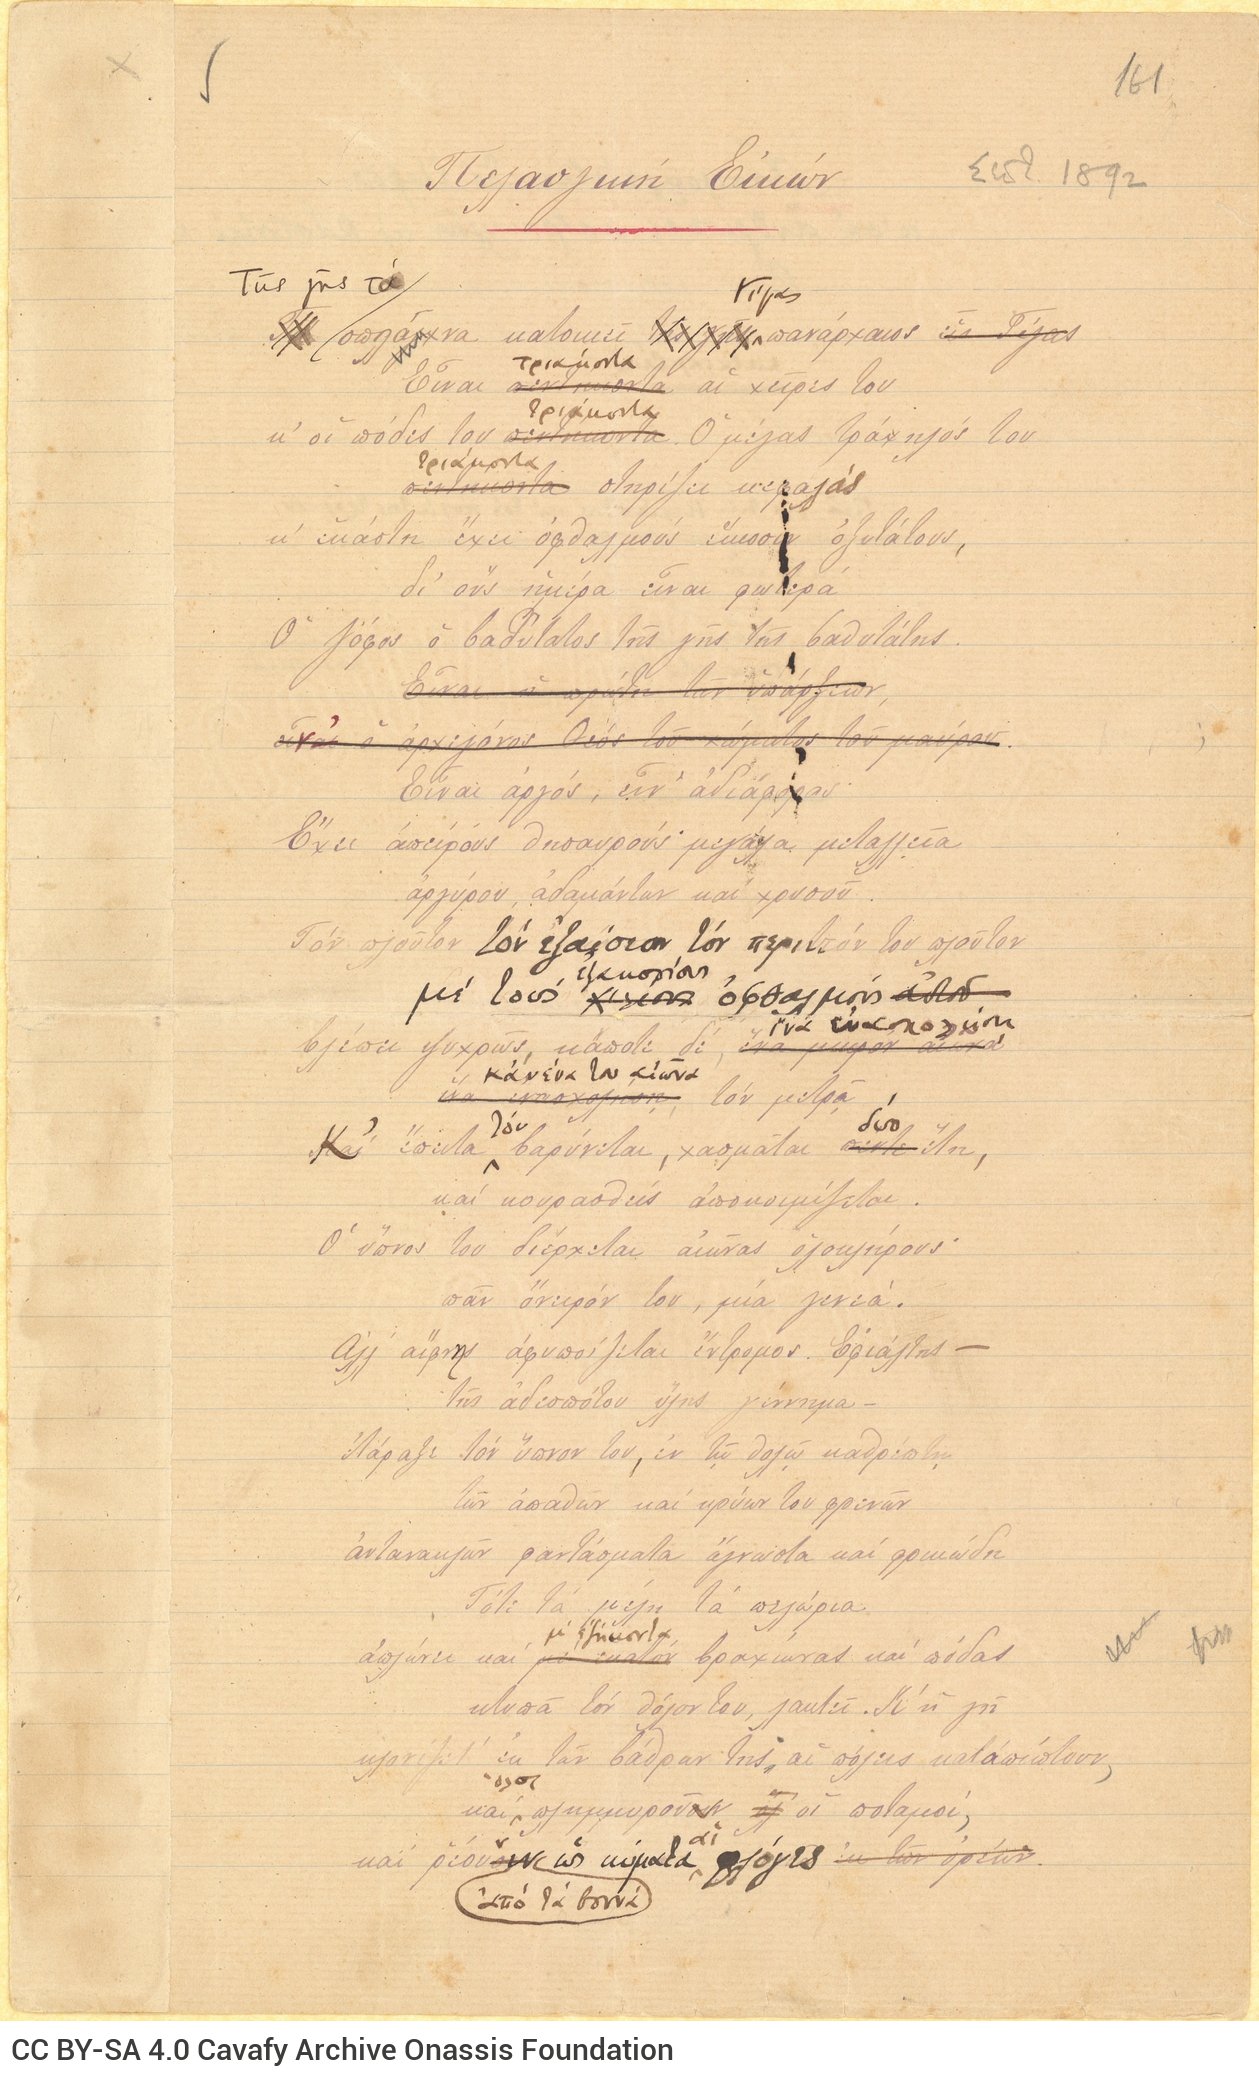 Manuscript of the poem "Pelasgian Image" on both sides of a ruled sheet, written in a handwriting other than Cavafy's, wit